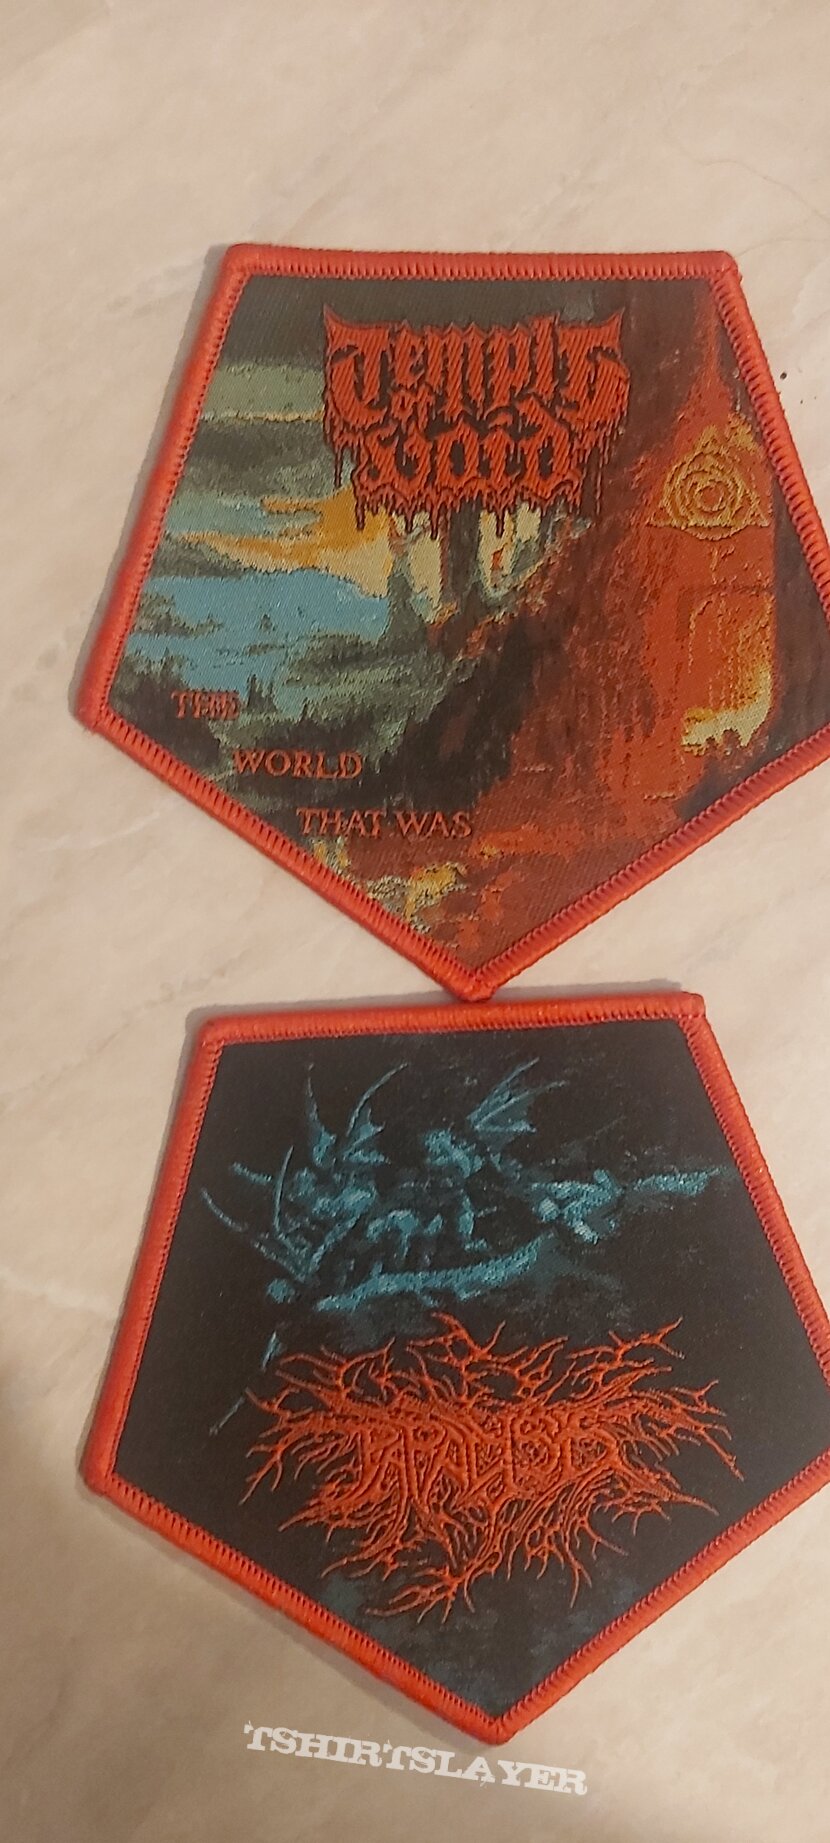 Temple Of Void Patches for morbid eye